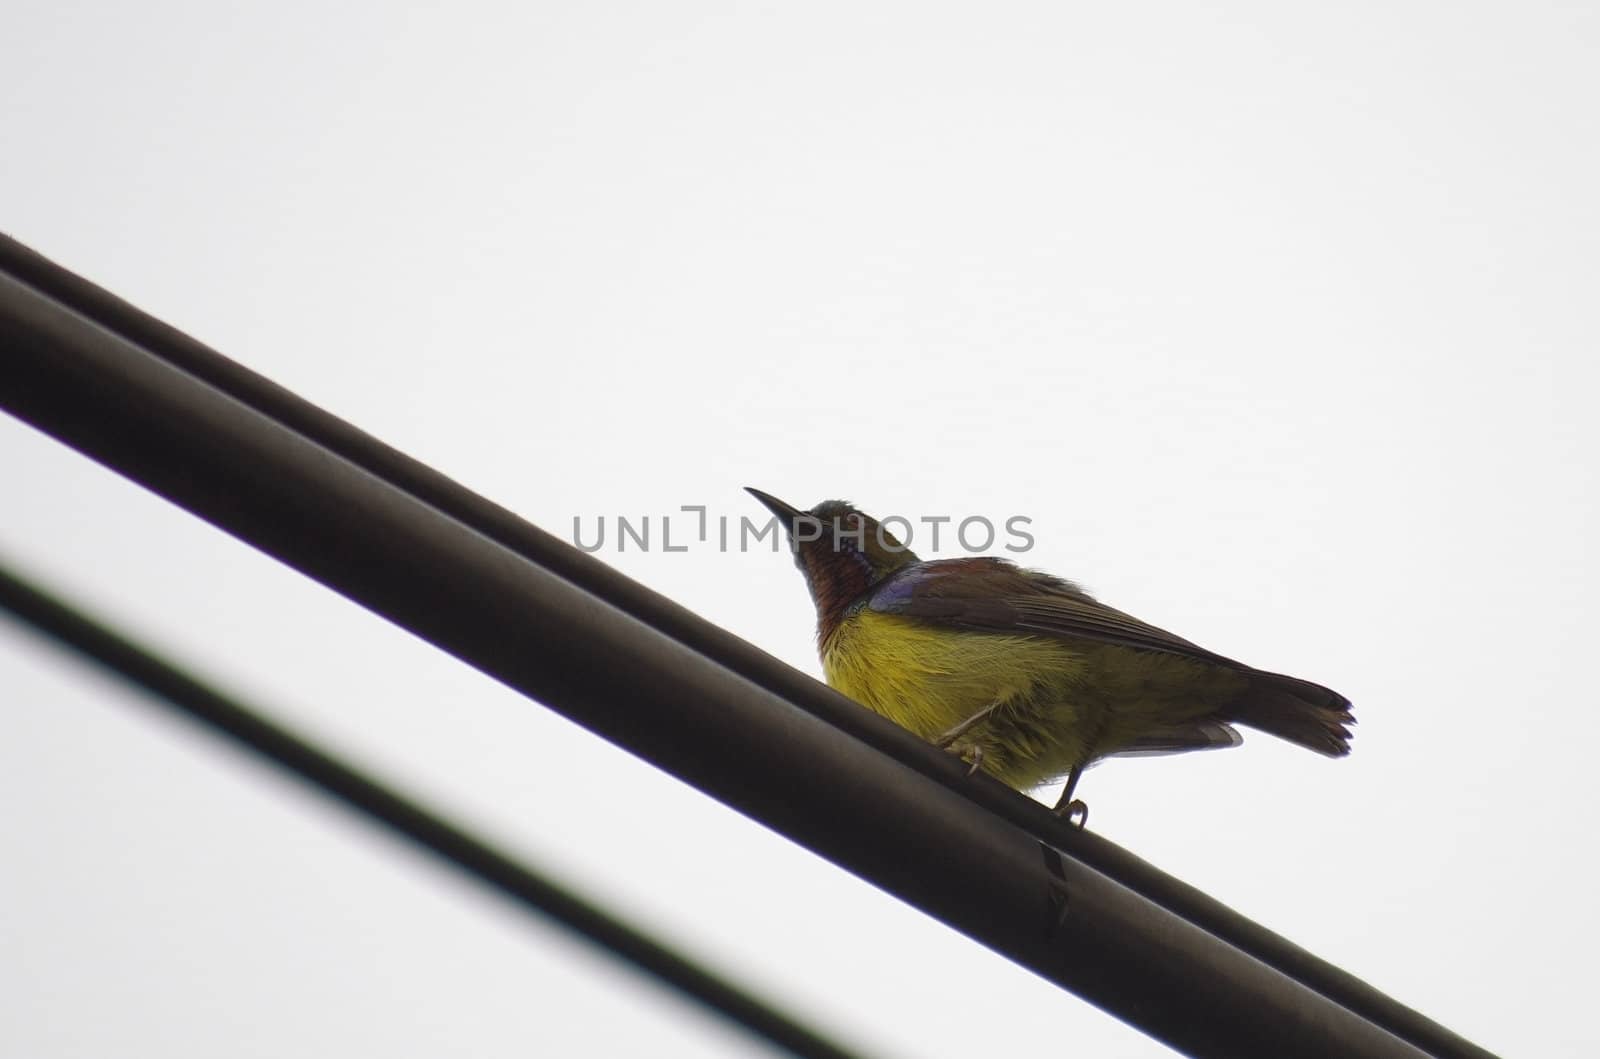 Olive-backed sunbird live in city